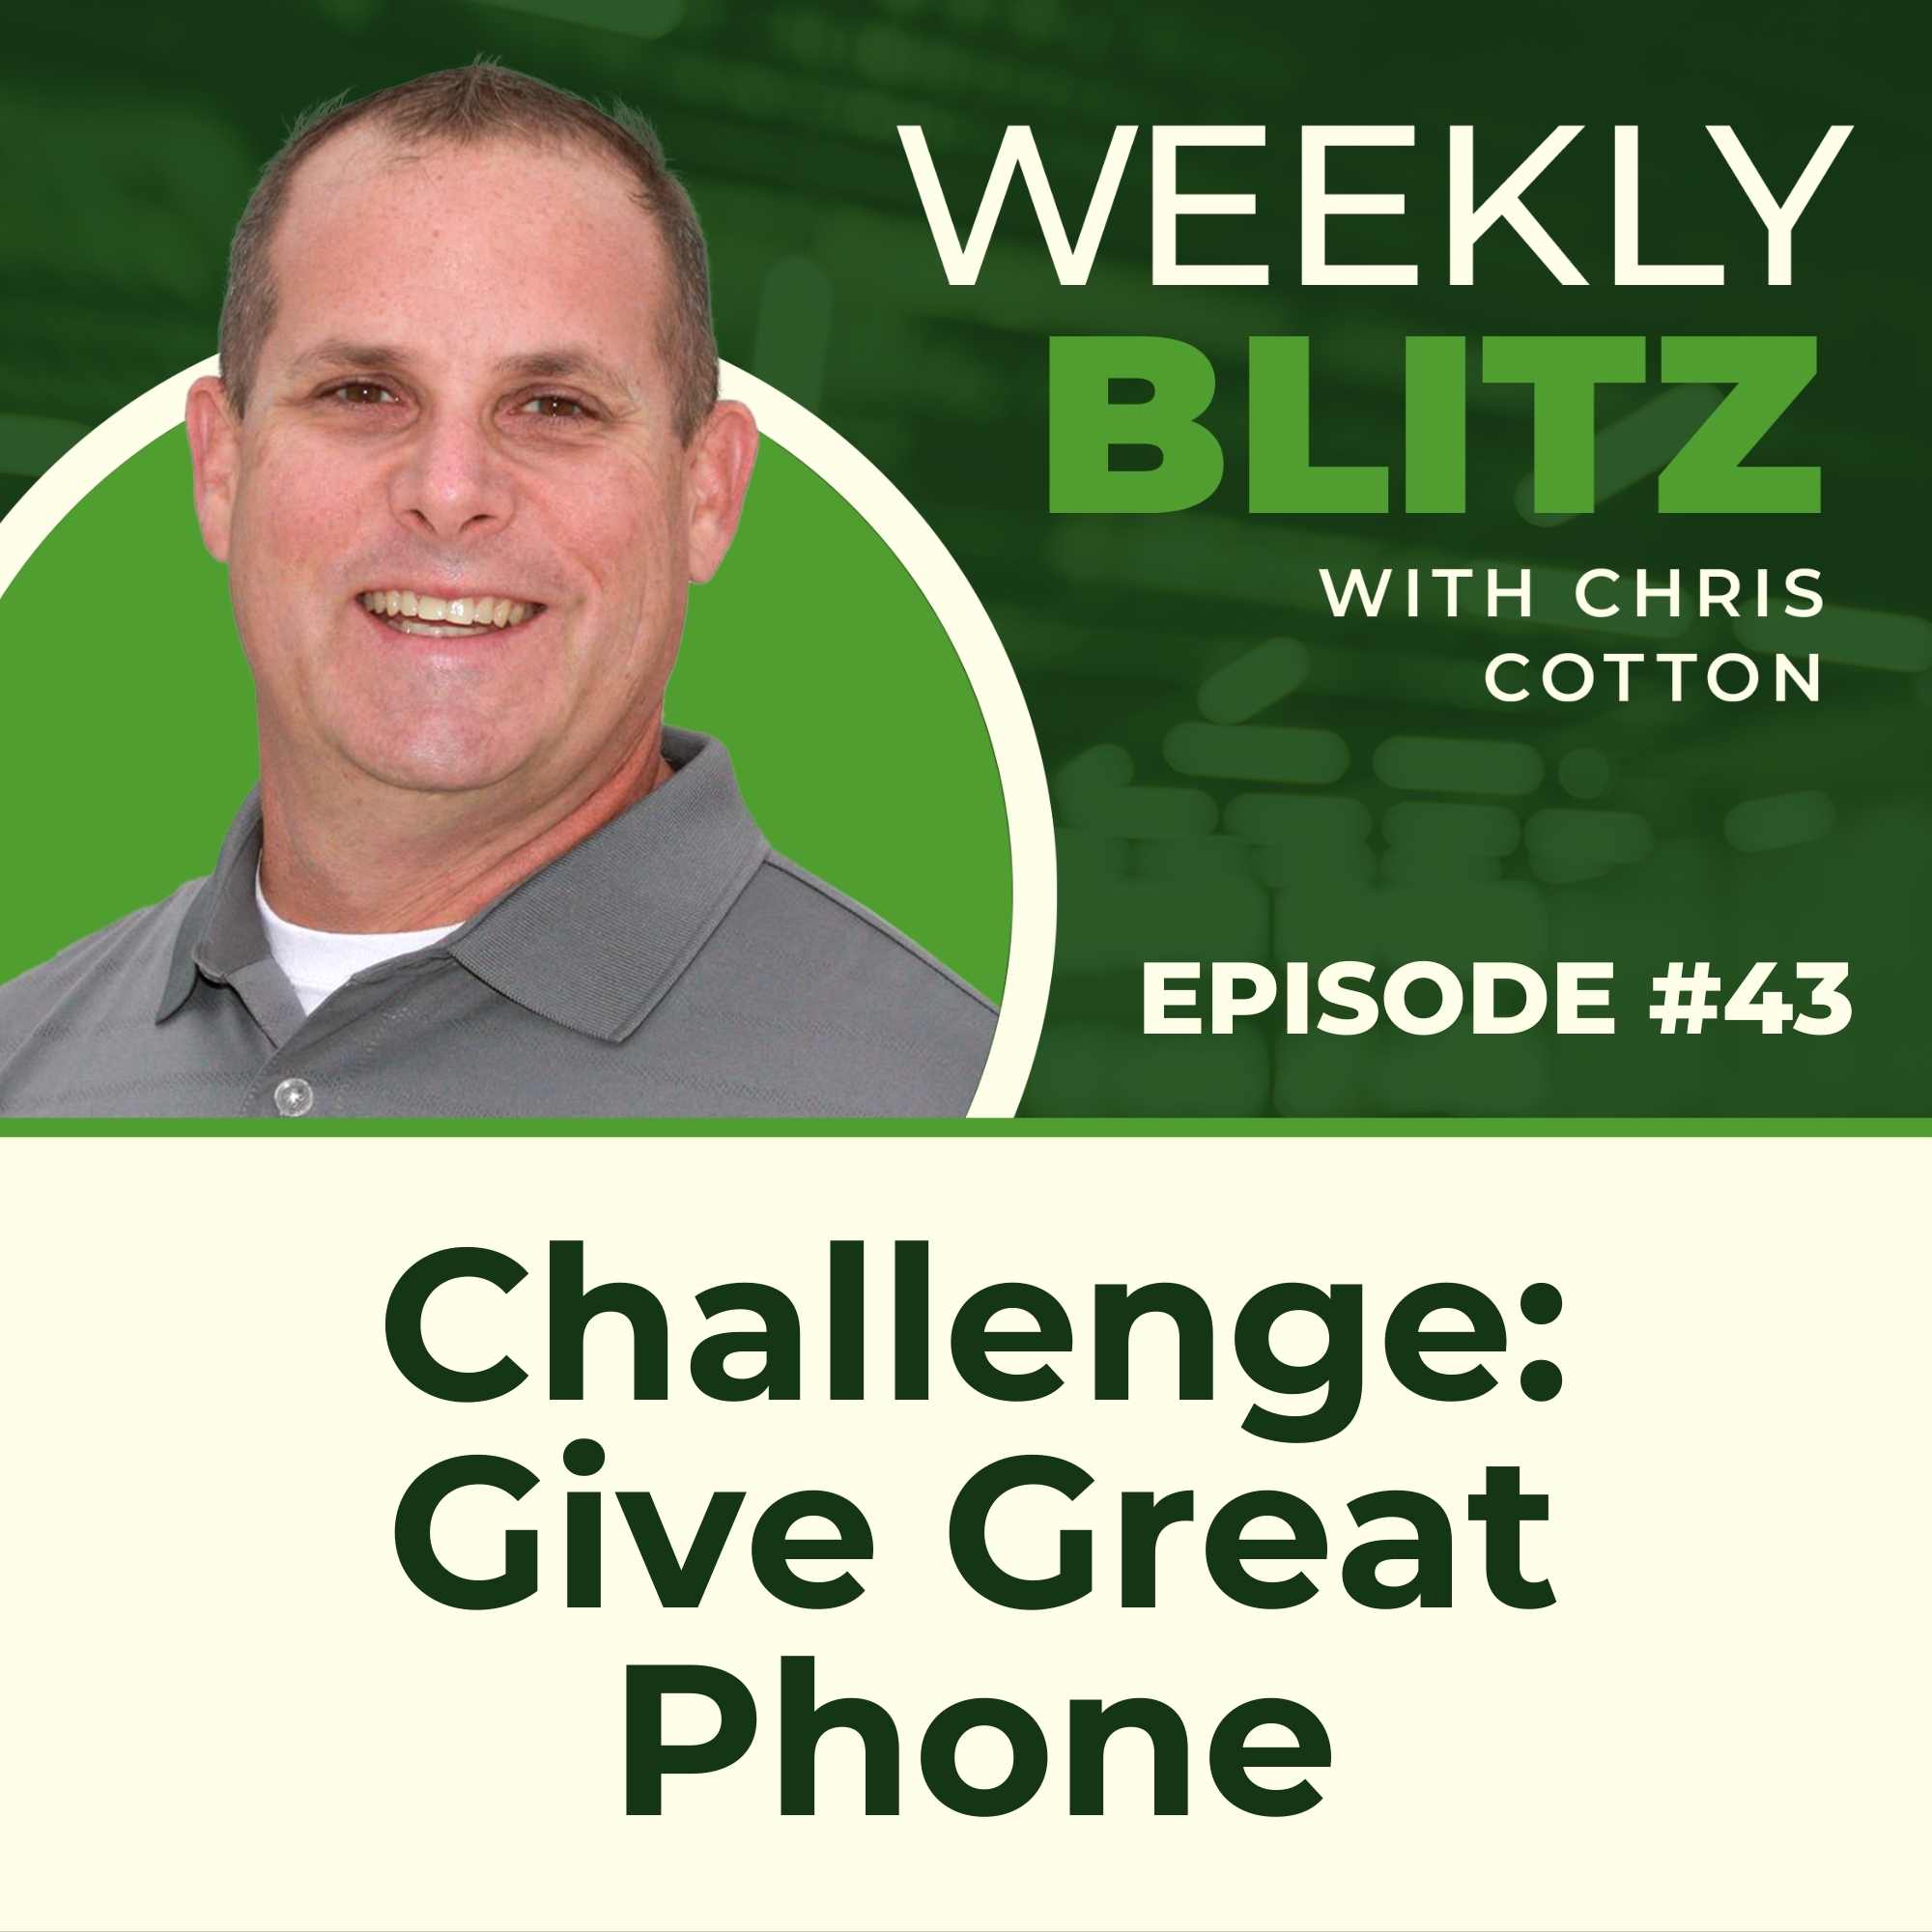 Artwork for podcast Chris Cotton Weekly Blitz